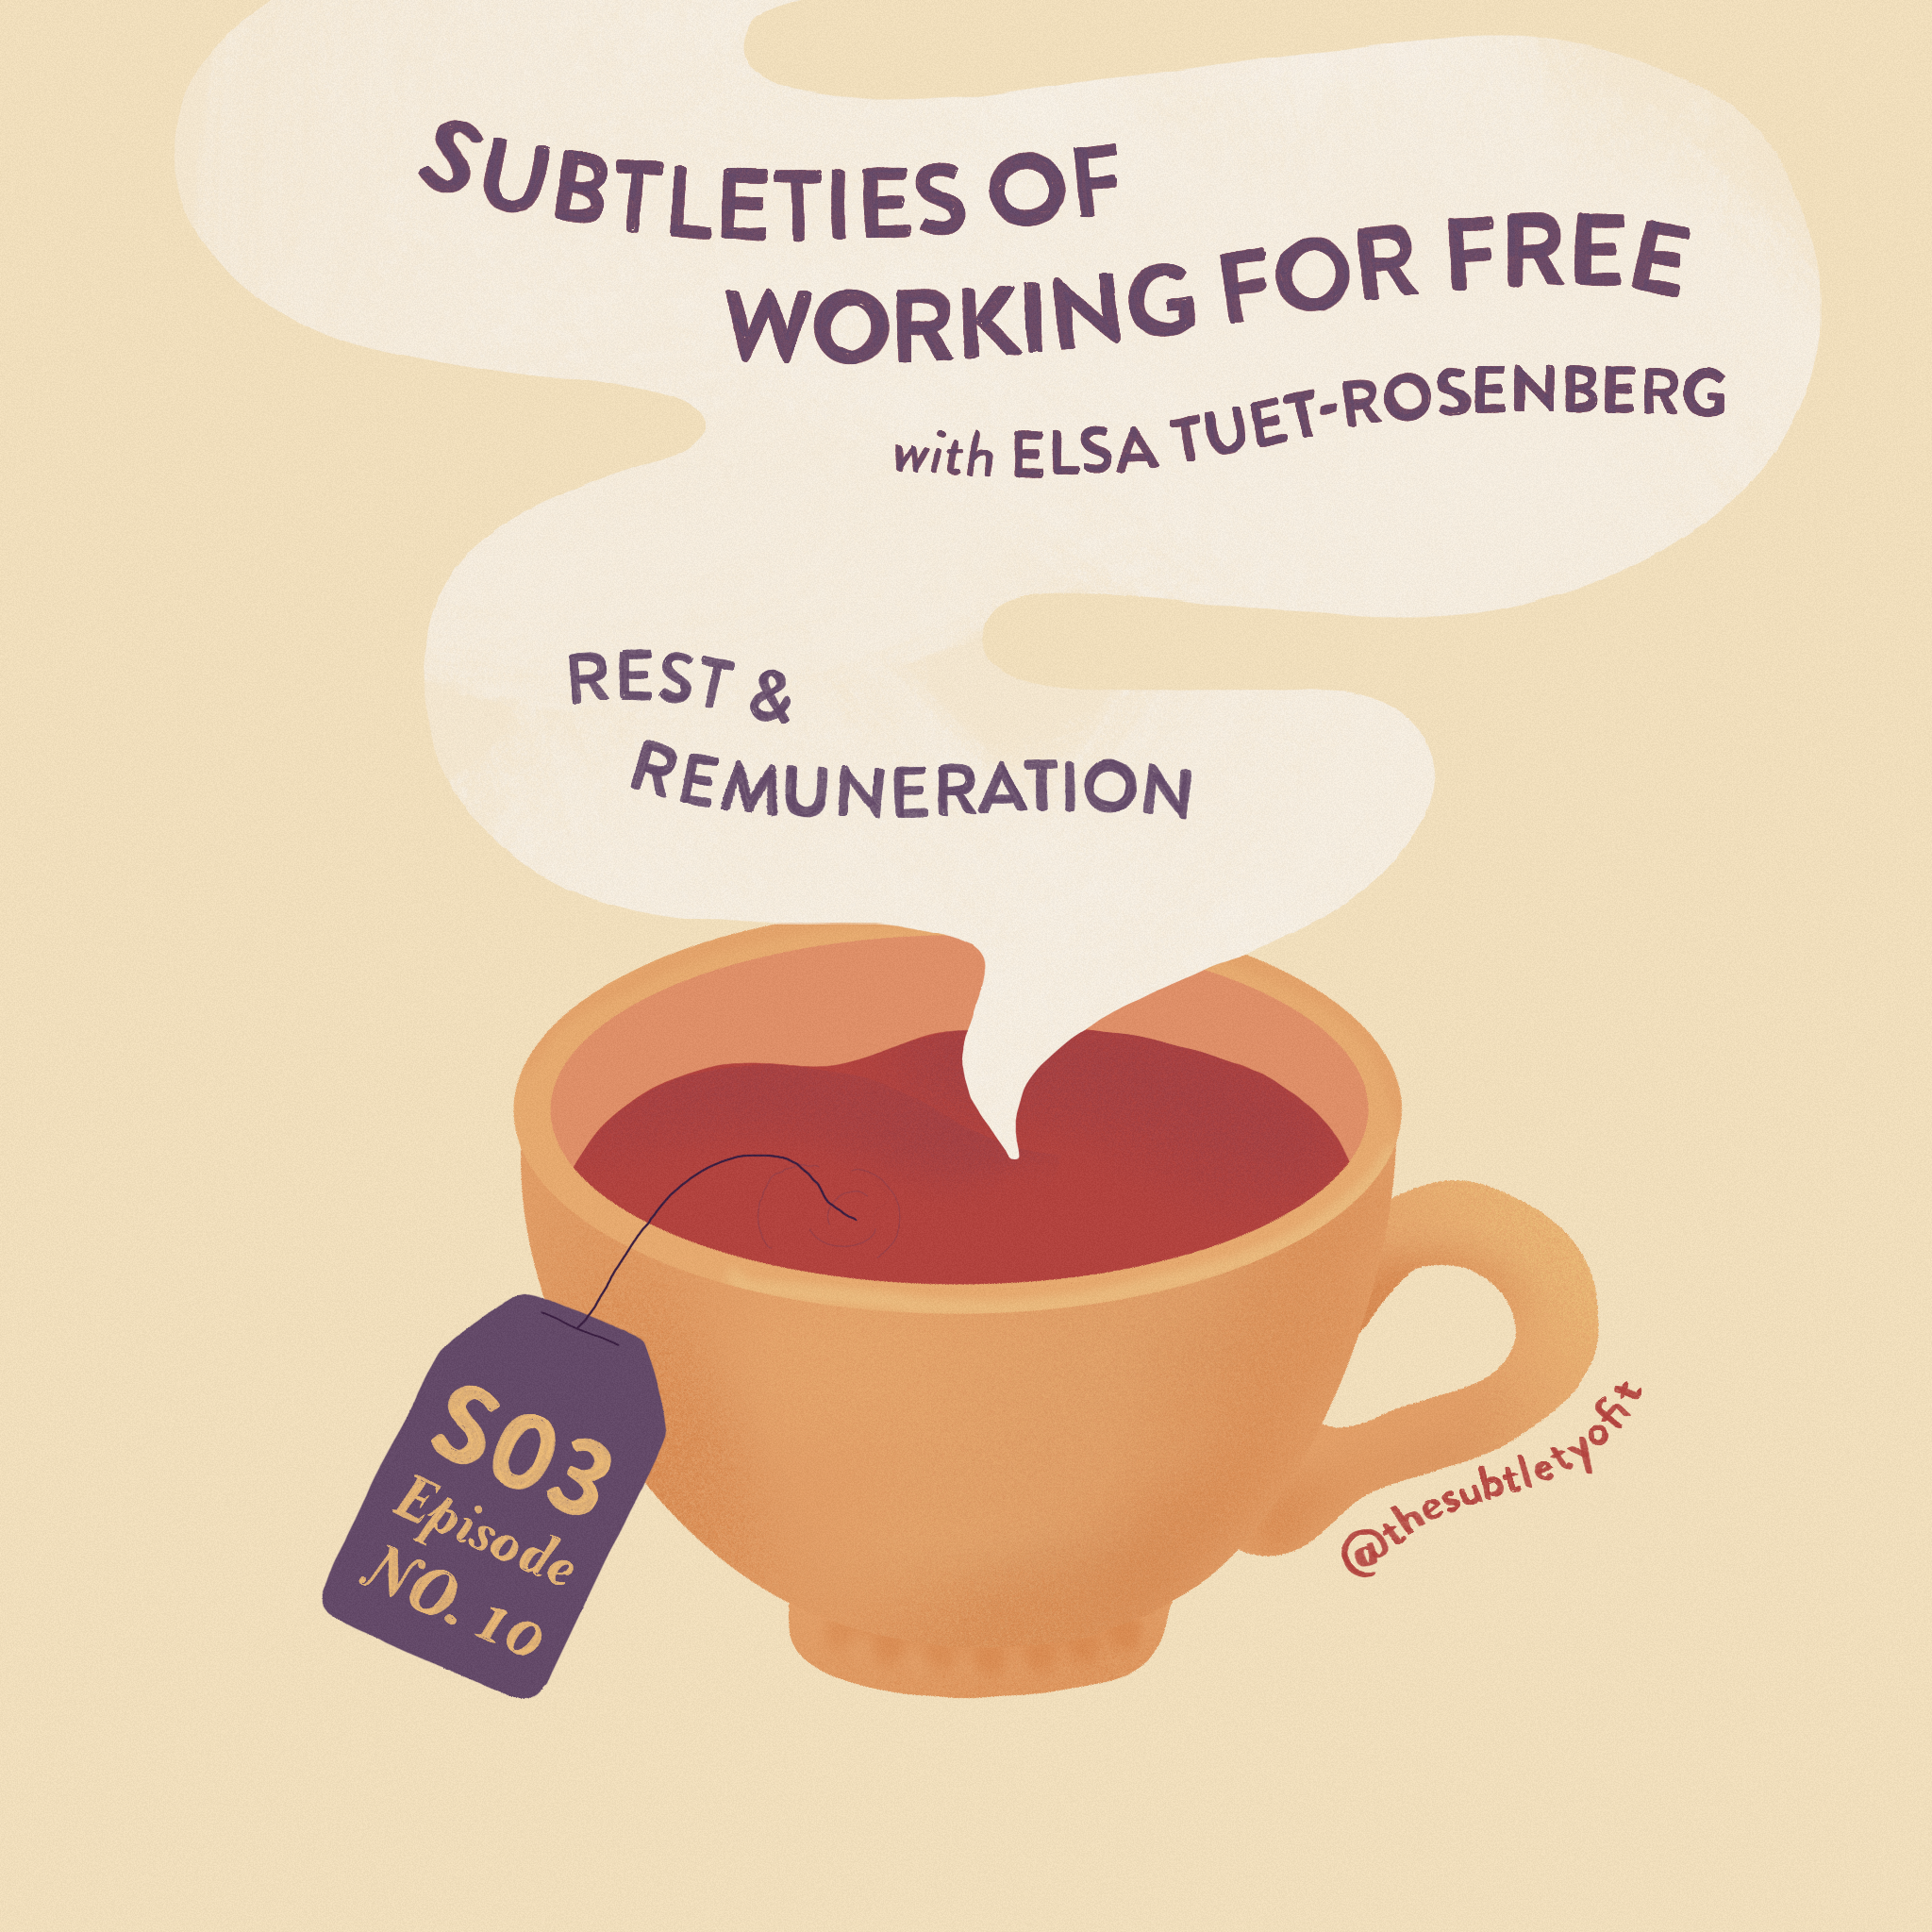 Subtleties of Working For Free with Elsa Tuet-Rosenberg